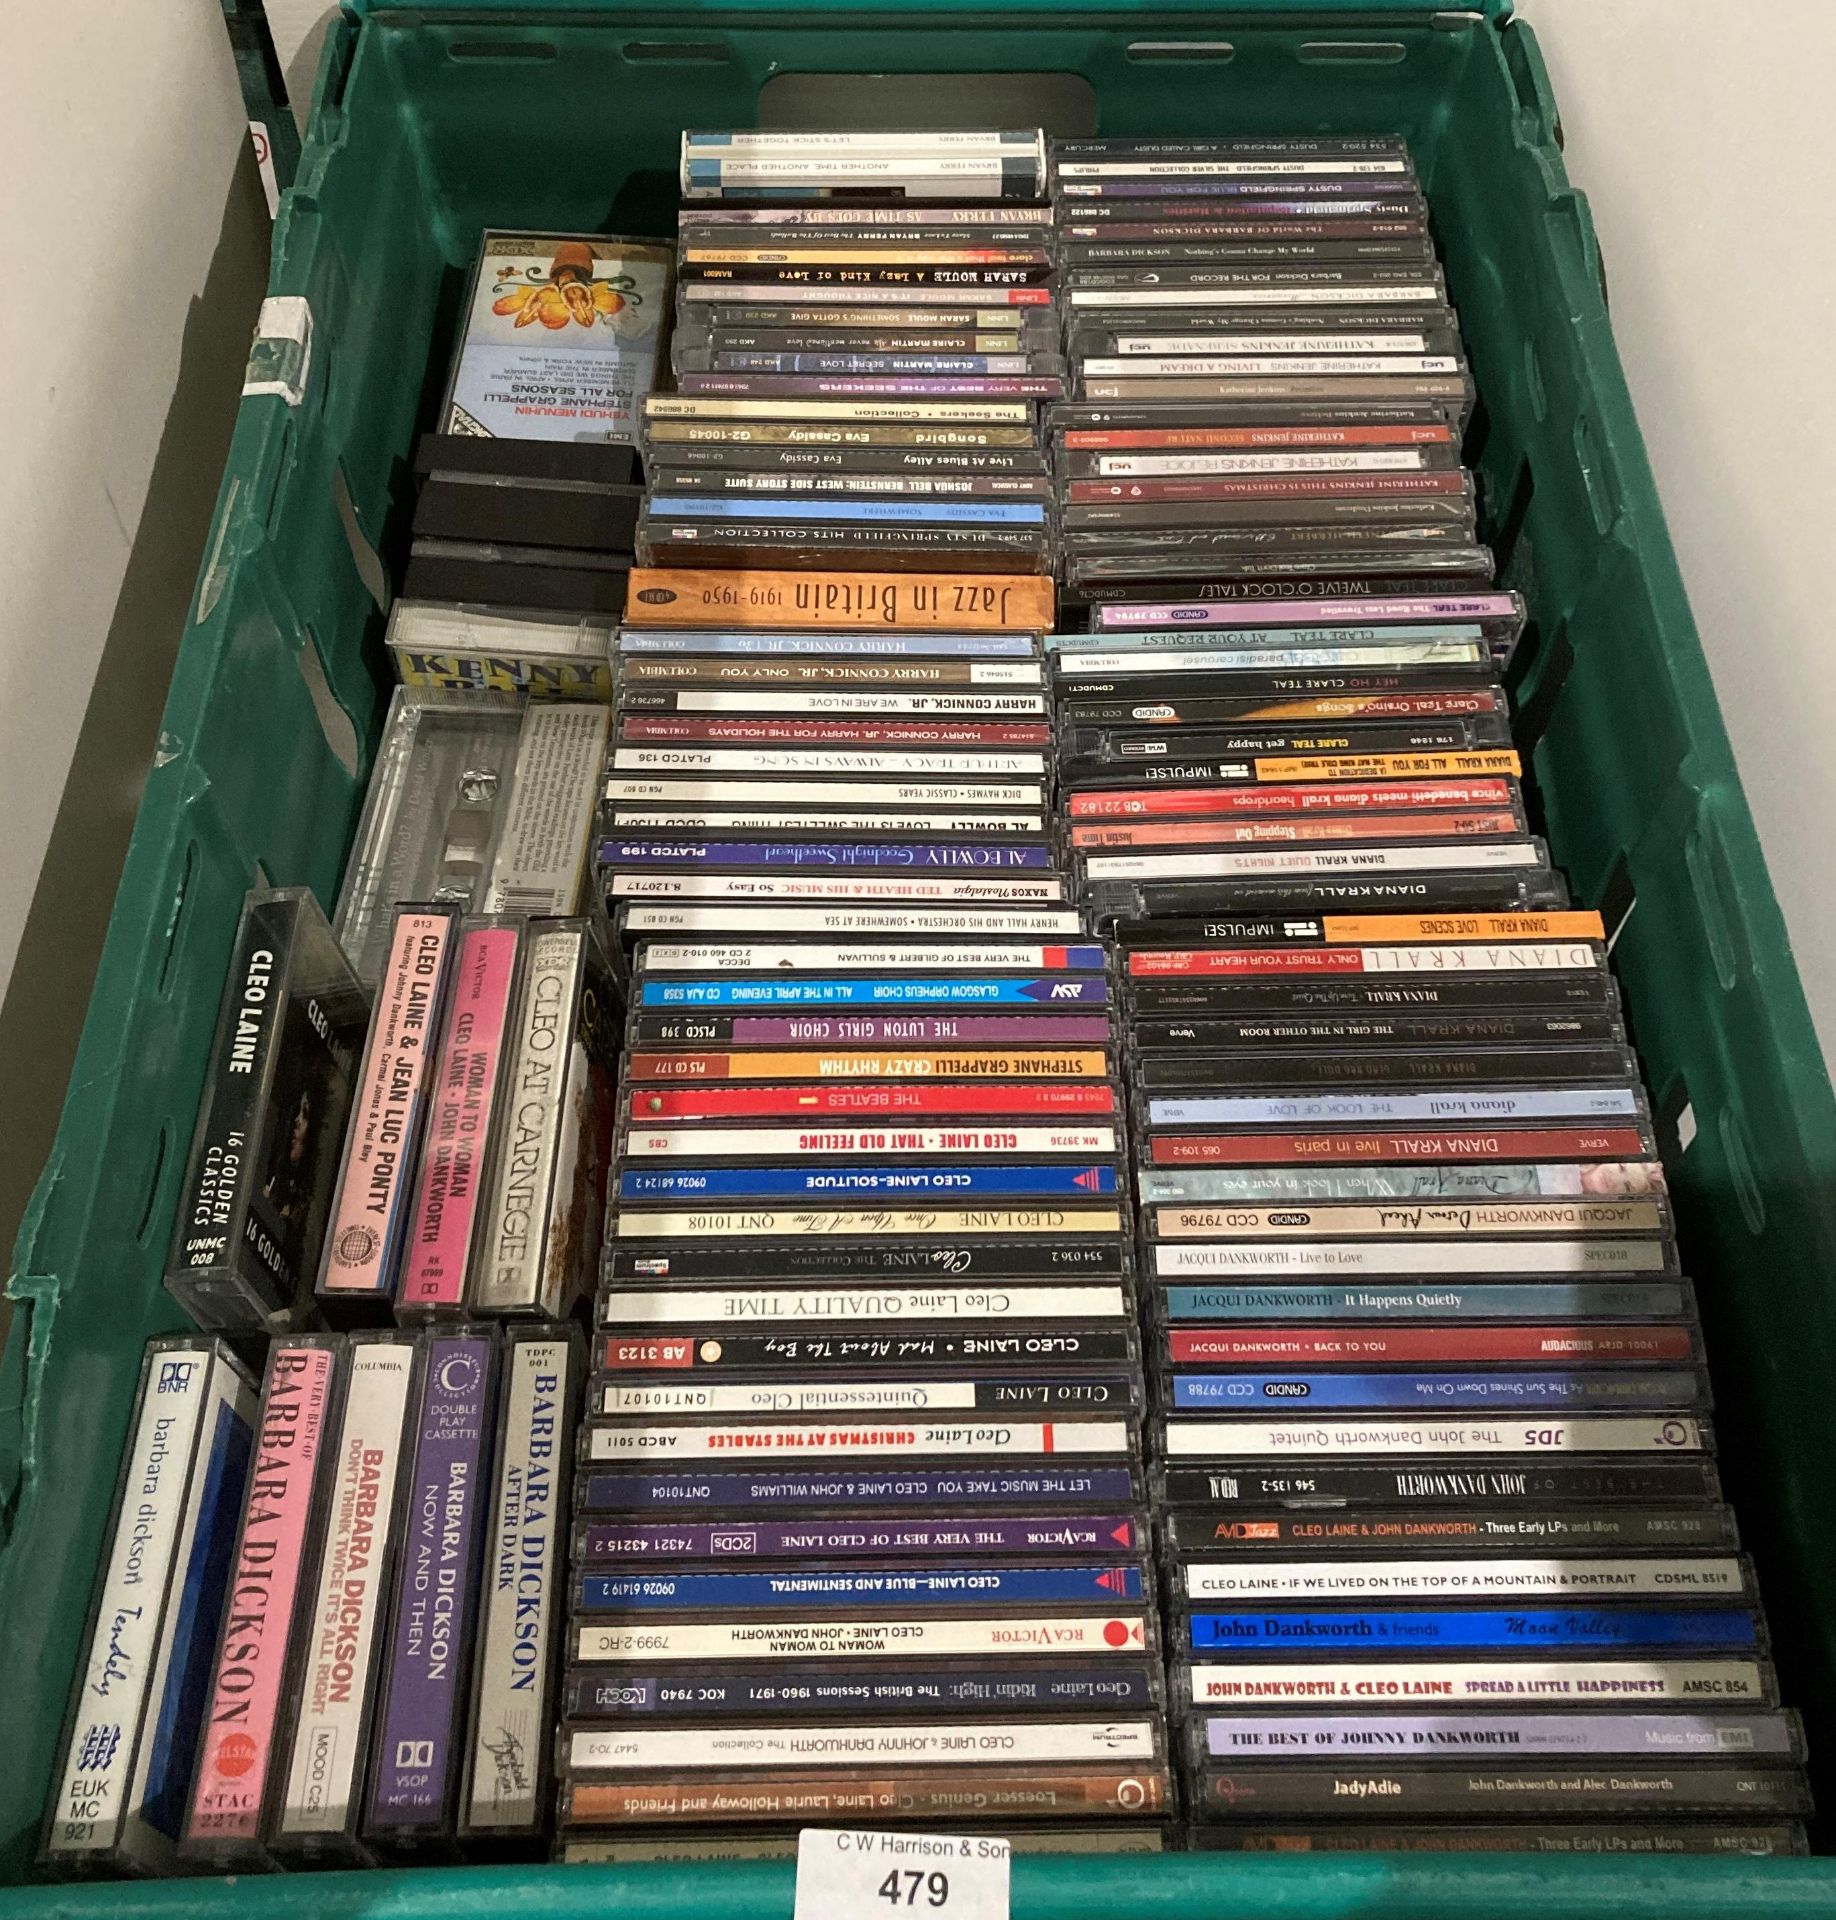 Contents to crate - approximately 100 assorted music CDs including easy listening - The Seekers,